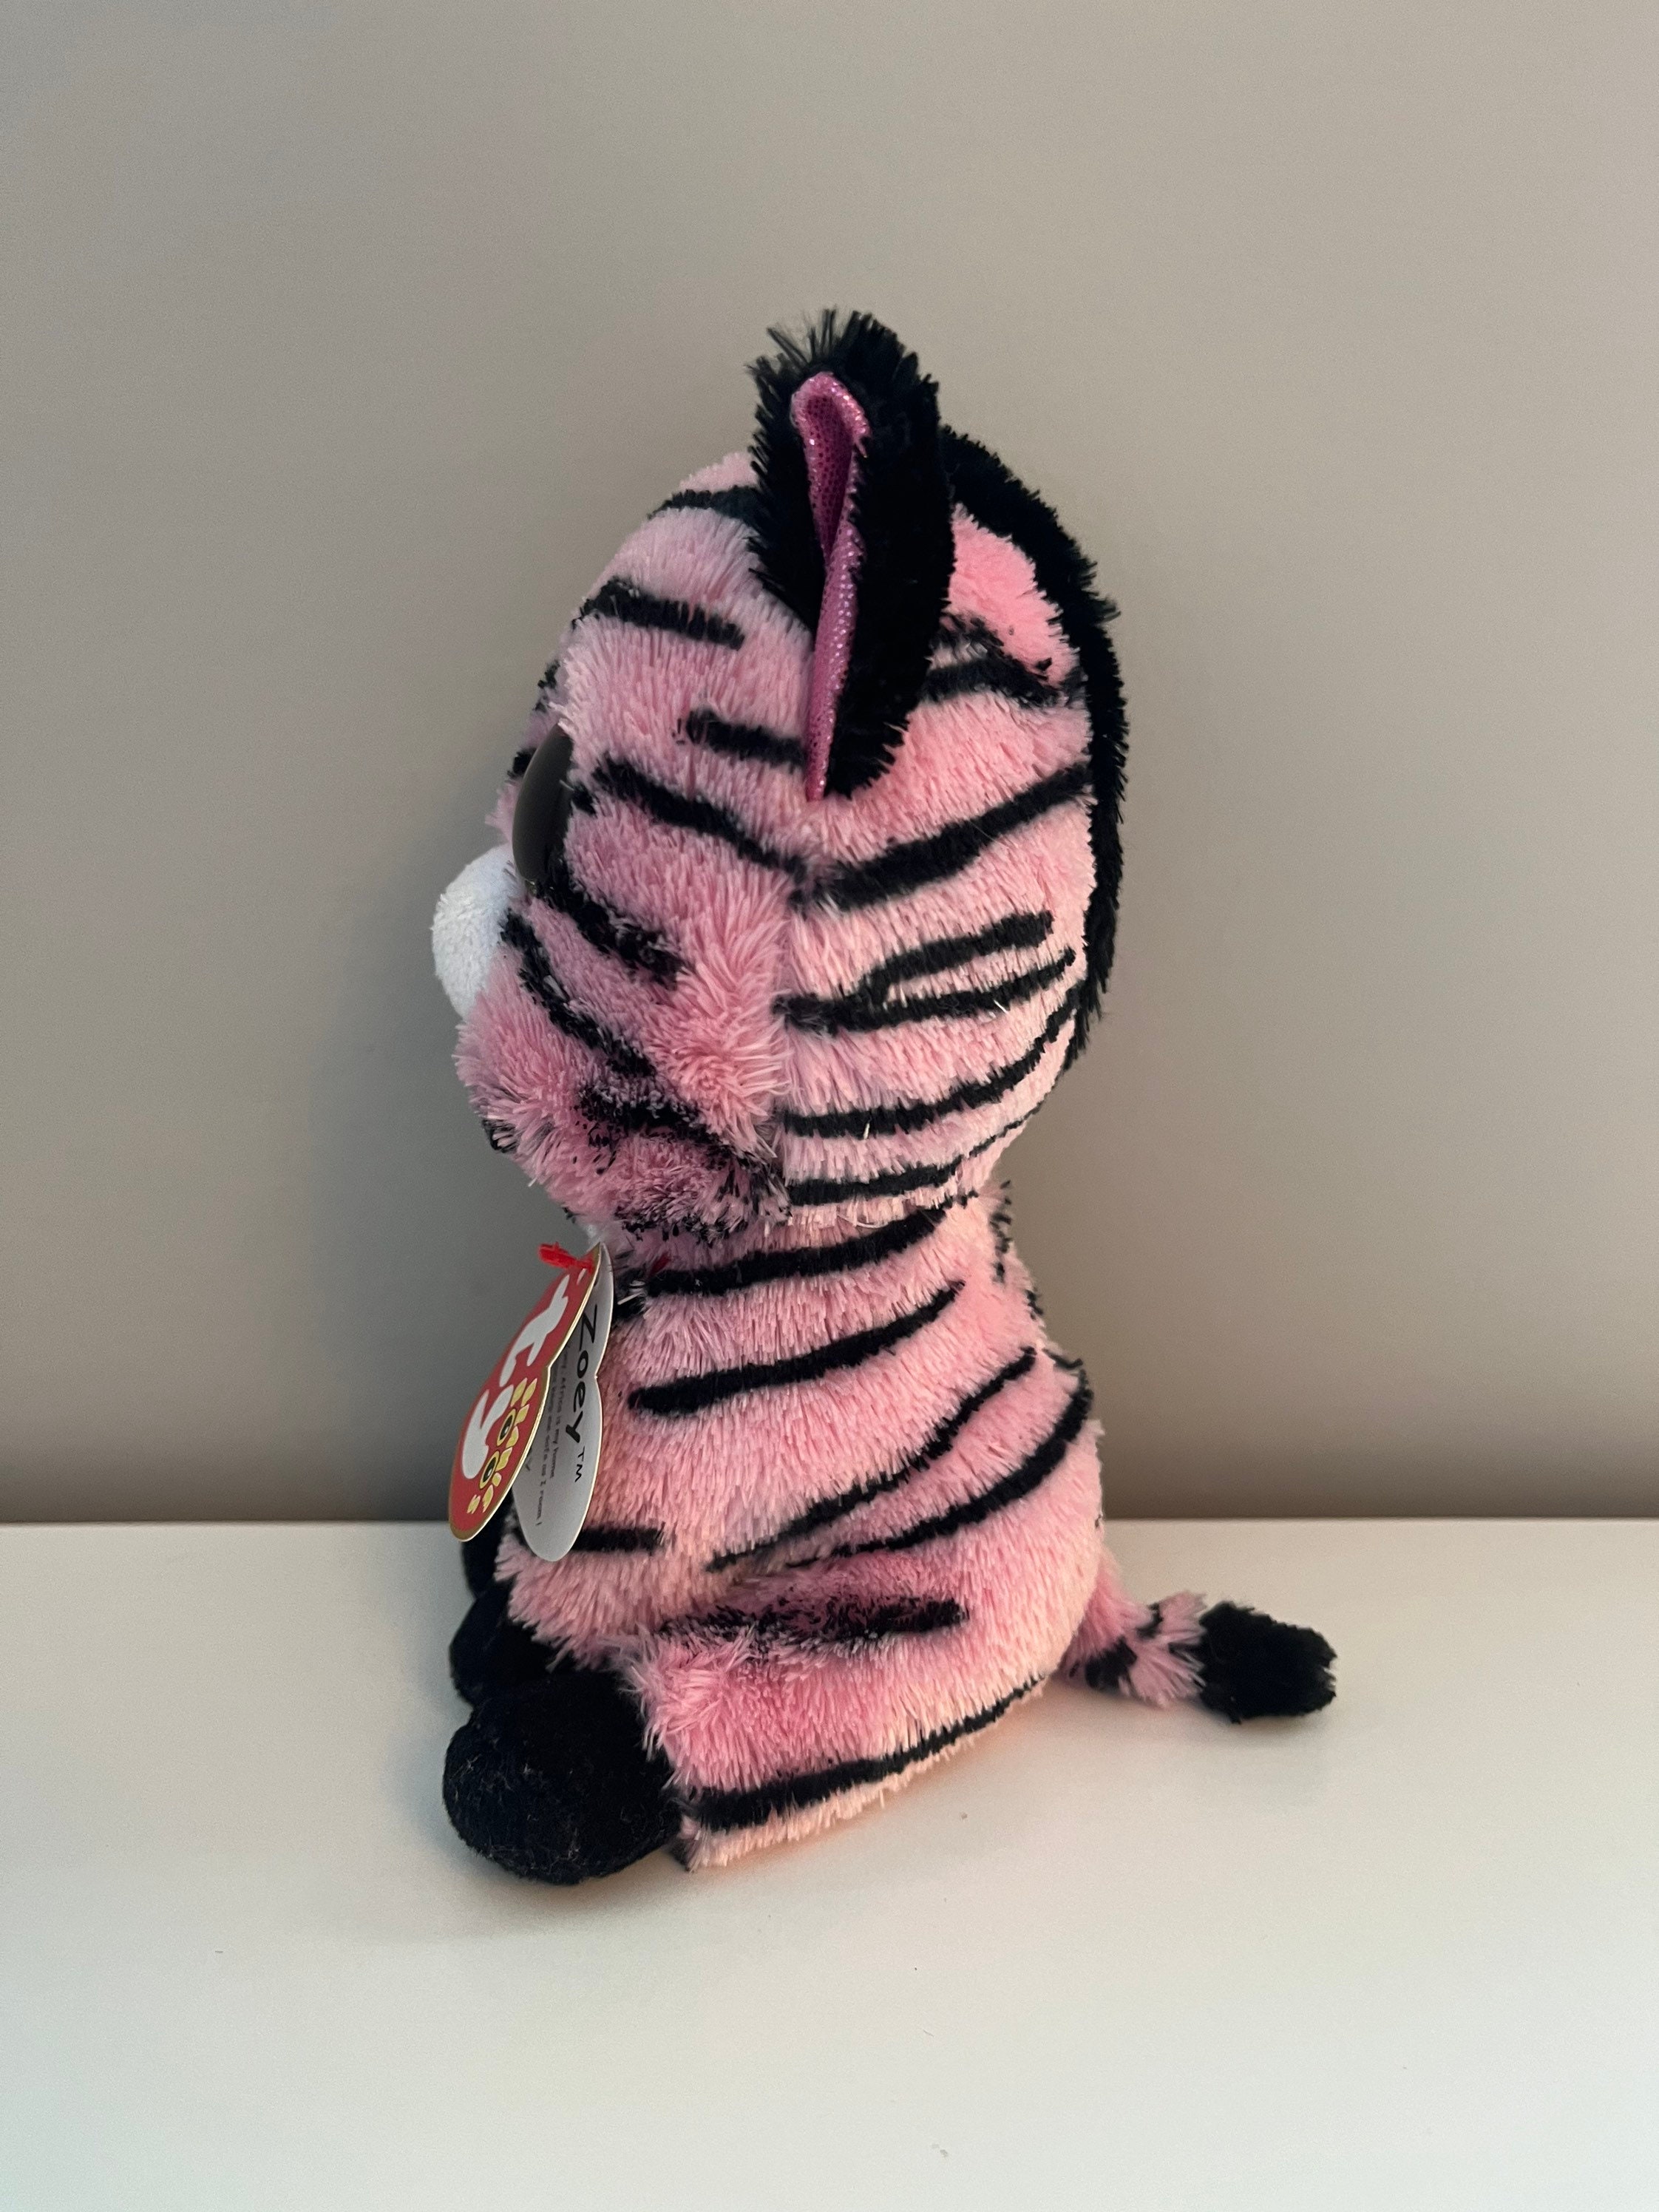 TY Beanie Boo Plush - Zoey the Zebra 15cm (Color may vary)